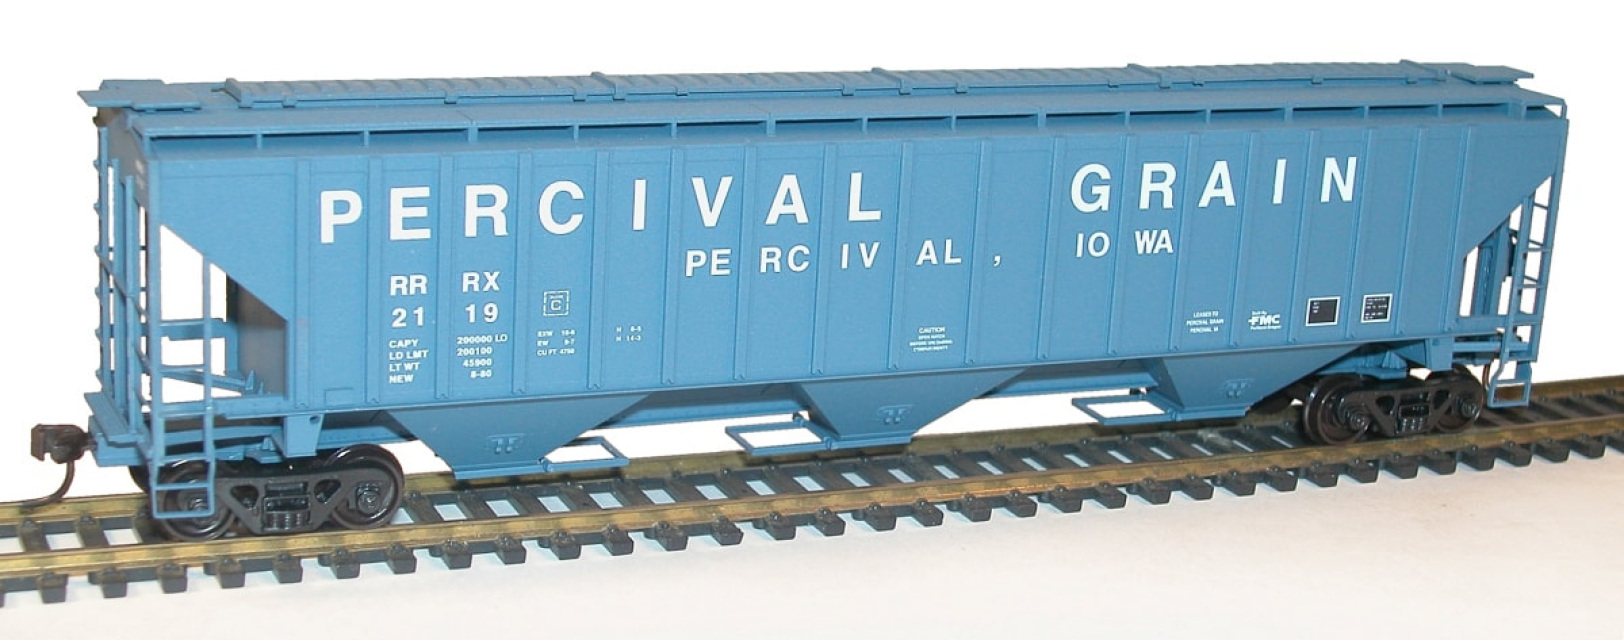 Accurail 81022 HO Portland Gin PS 4750 Covered Grain Hopper Kit #7814 for sale online 